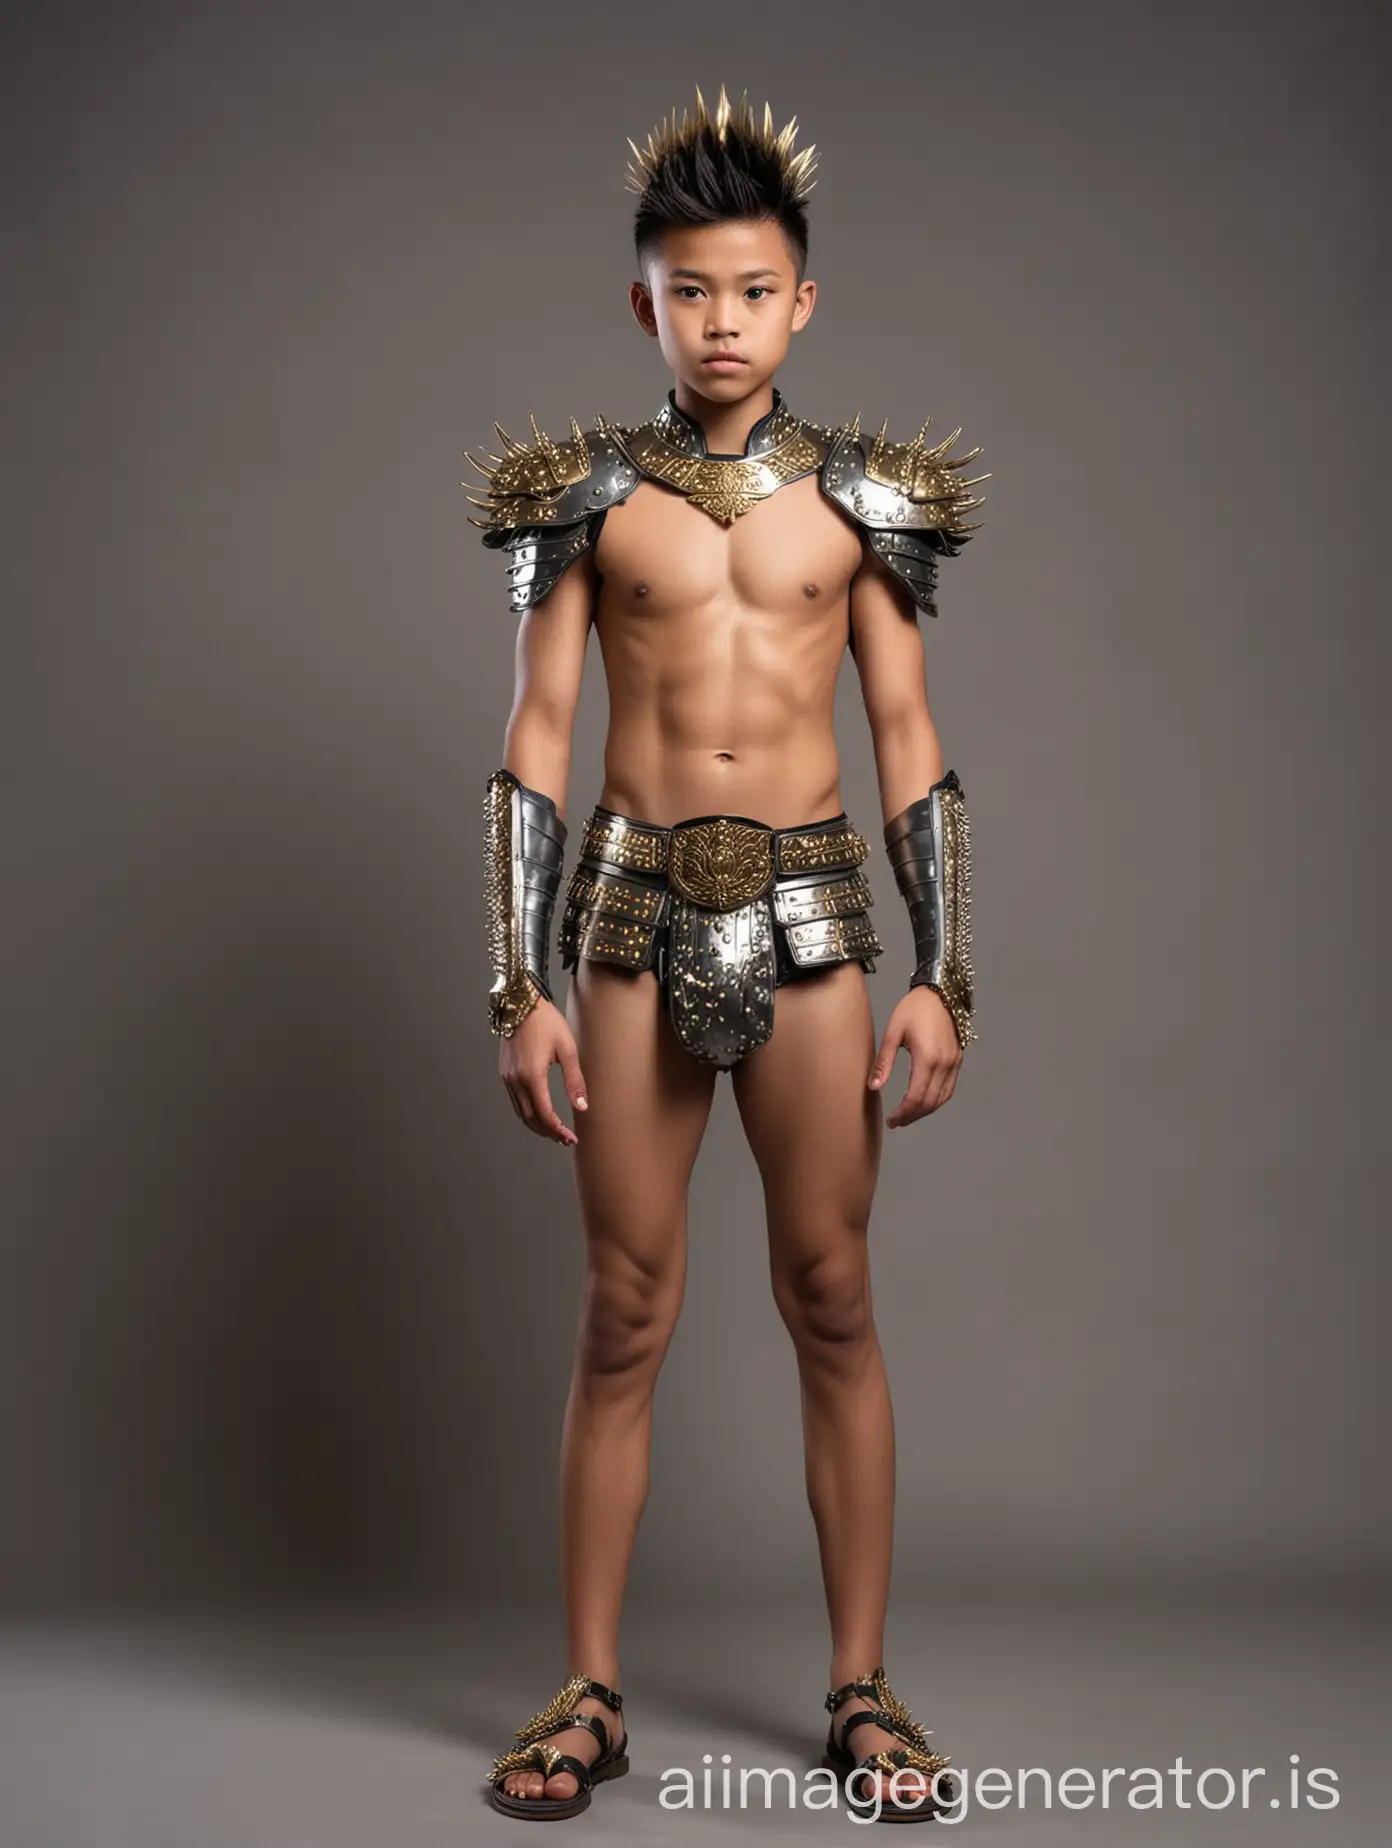 Teen boy regal Vietnamese warrior wearing metal Chinese armor and shiny gold and silver bikini brief underwear, full body pose, standing straight looking at camera with hands at sides, tall spiky Mohawk hair, dark skin, wearing leather sandals, simple royal background